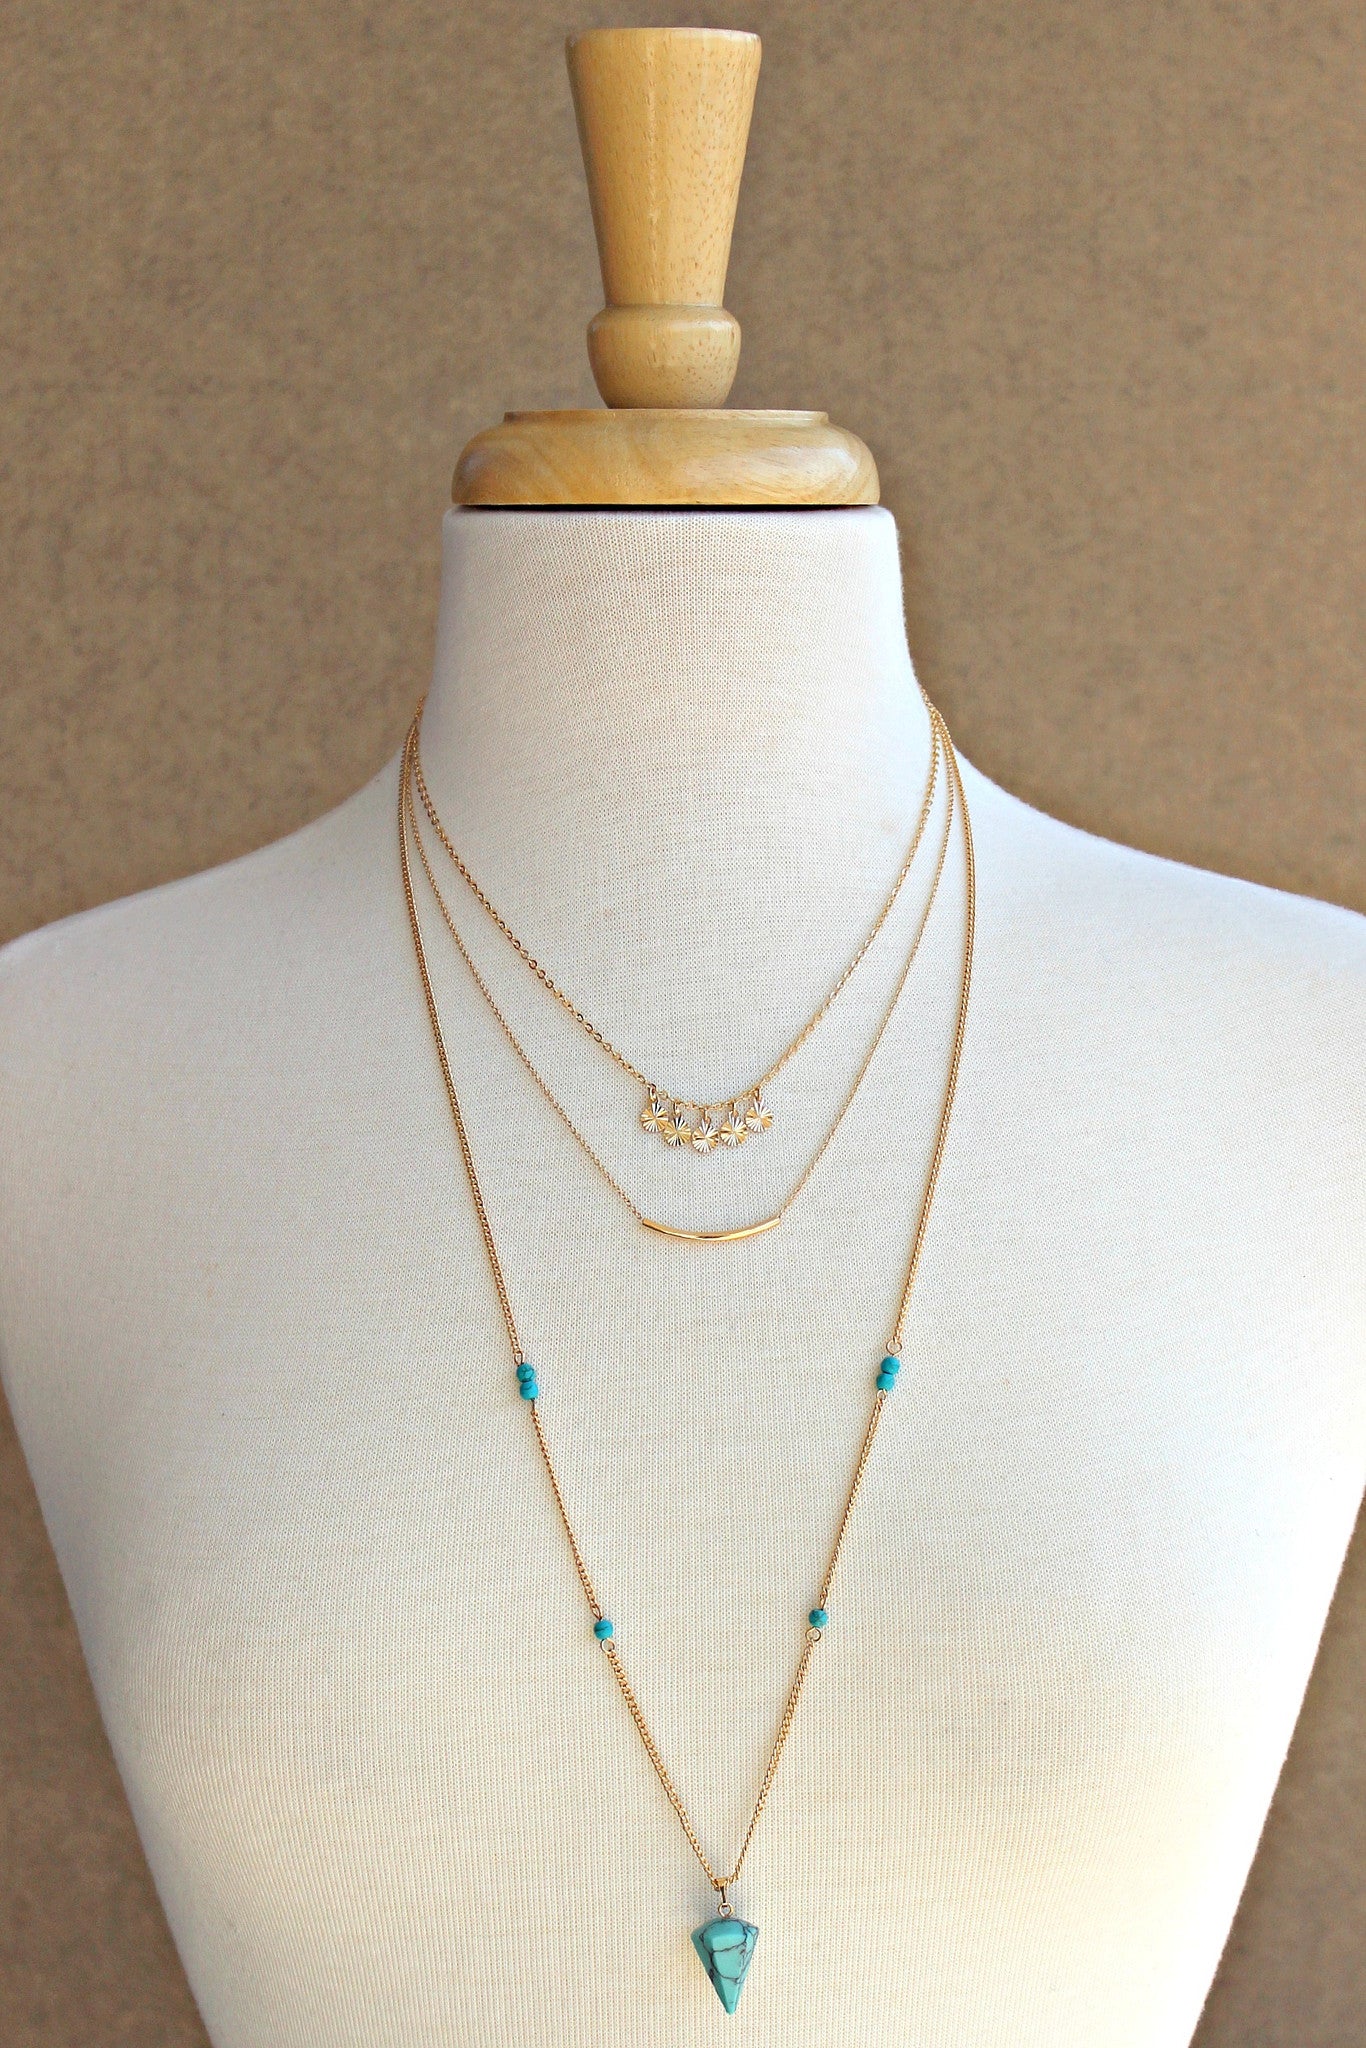 Layered Spike and Bar Necklace, Turquoise